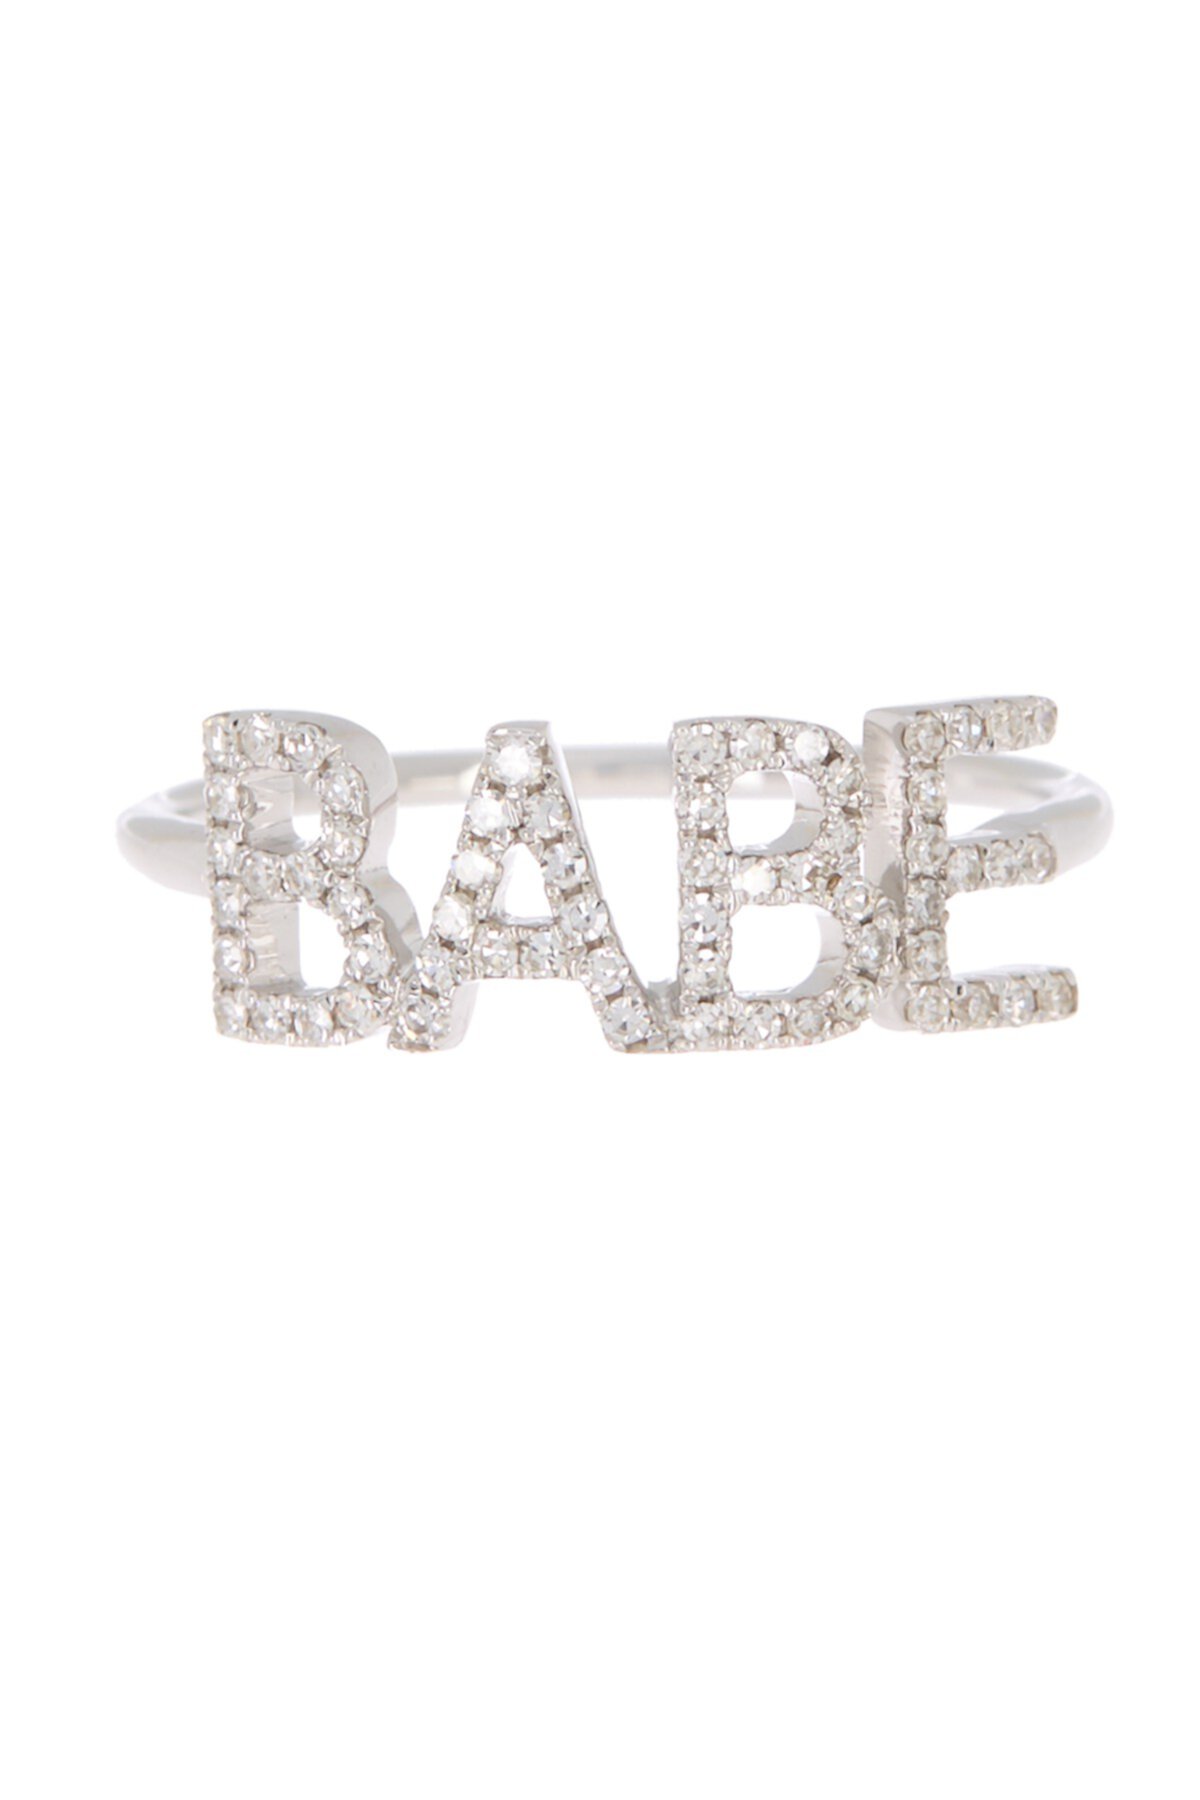 14K White Gold Pave 'BABE' Ring - Size 5 EF Collection